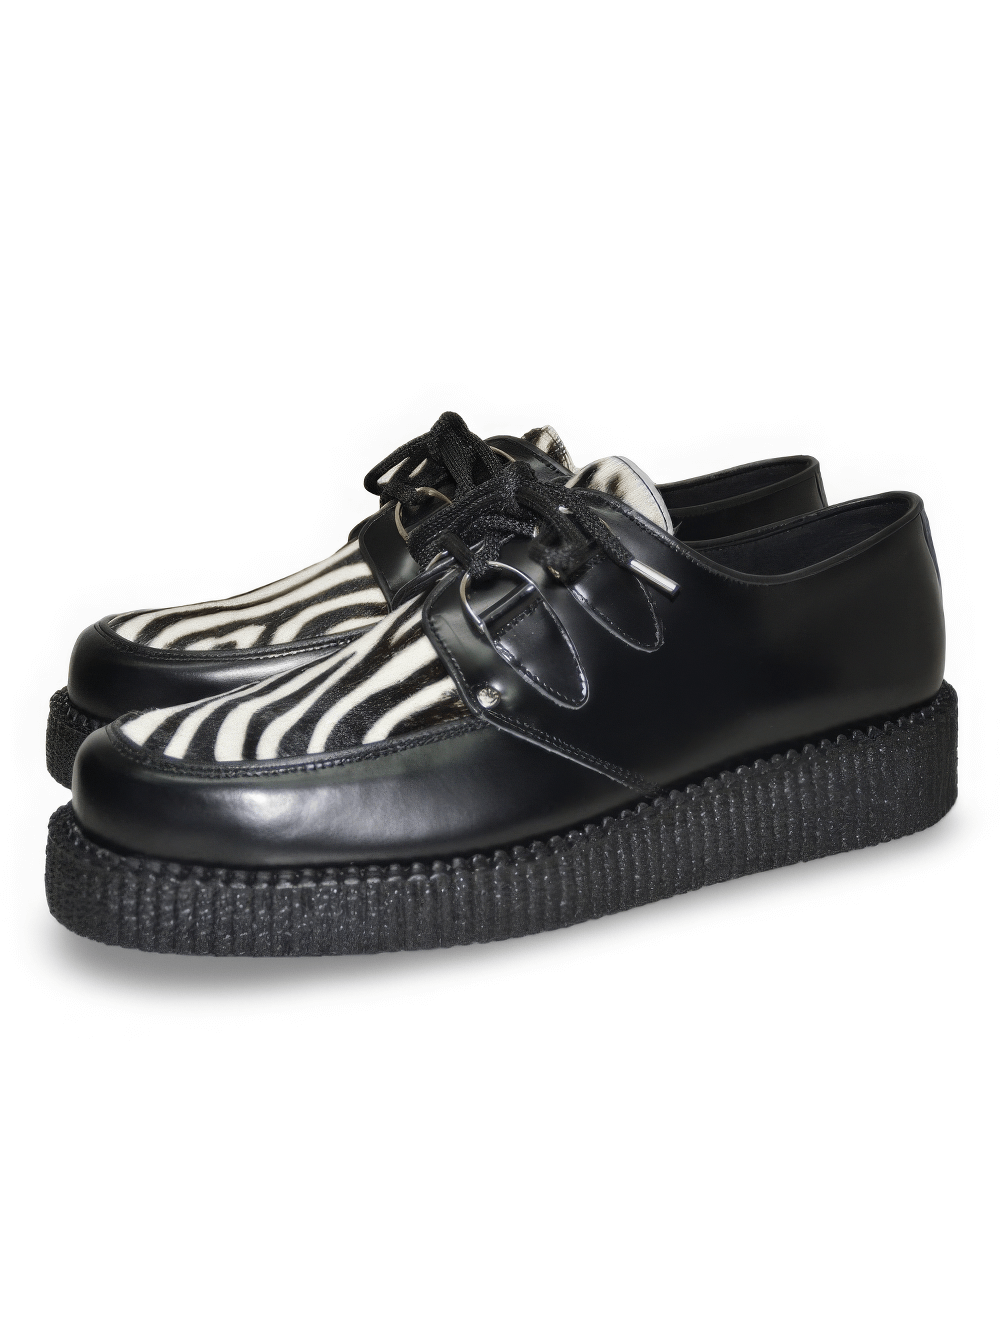 Unisex Leather and Fur Creeper Shoes with Rubber Sole